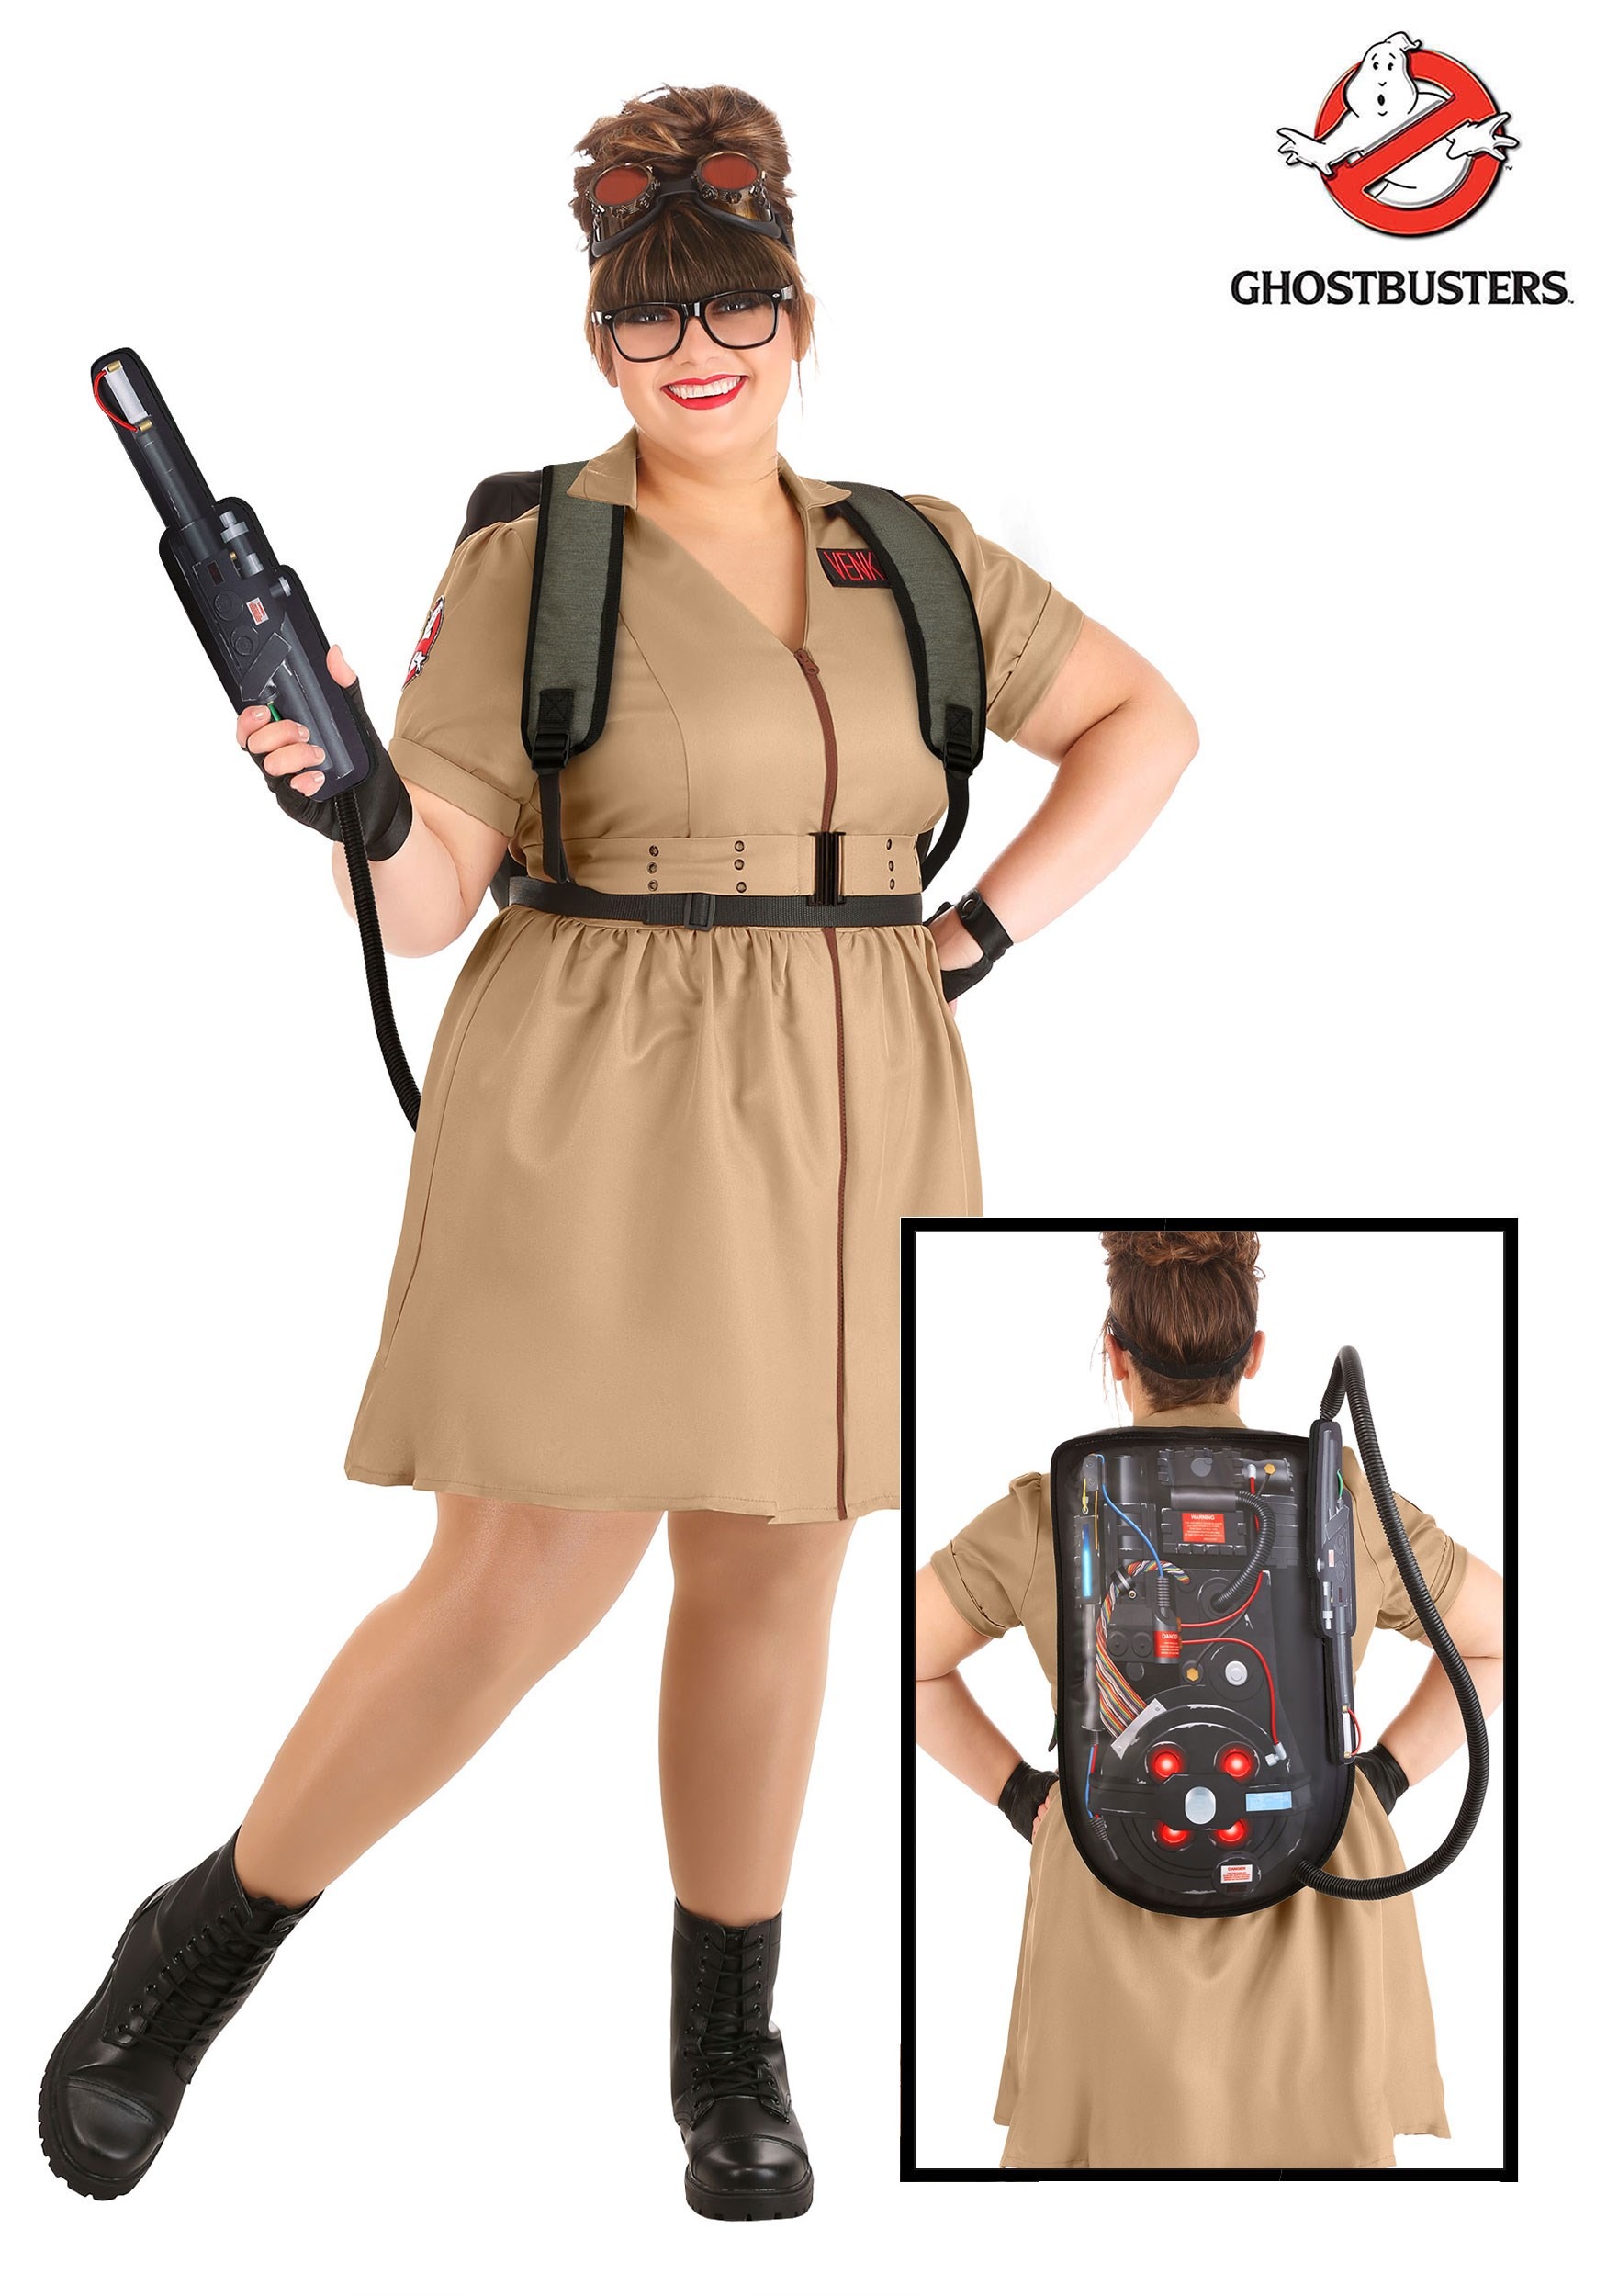 GEORGE Adult WOMEN Ghostbusters Halloween Costume Sizes 8-22